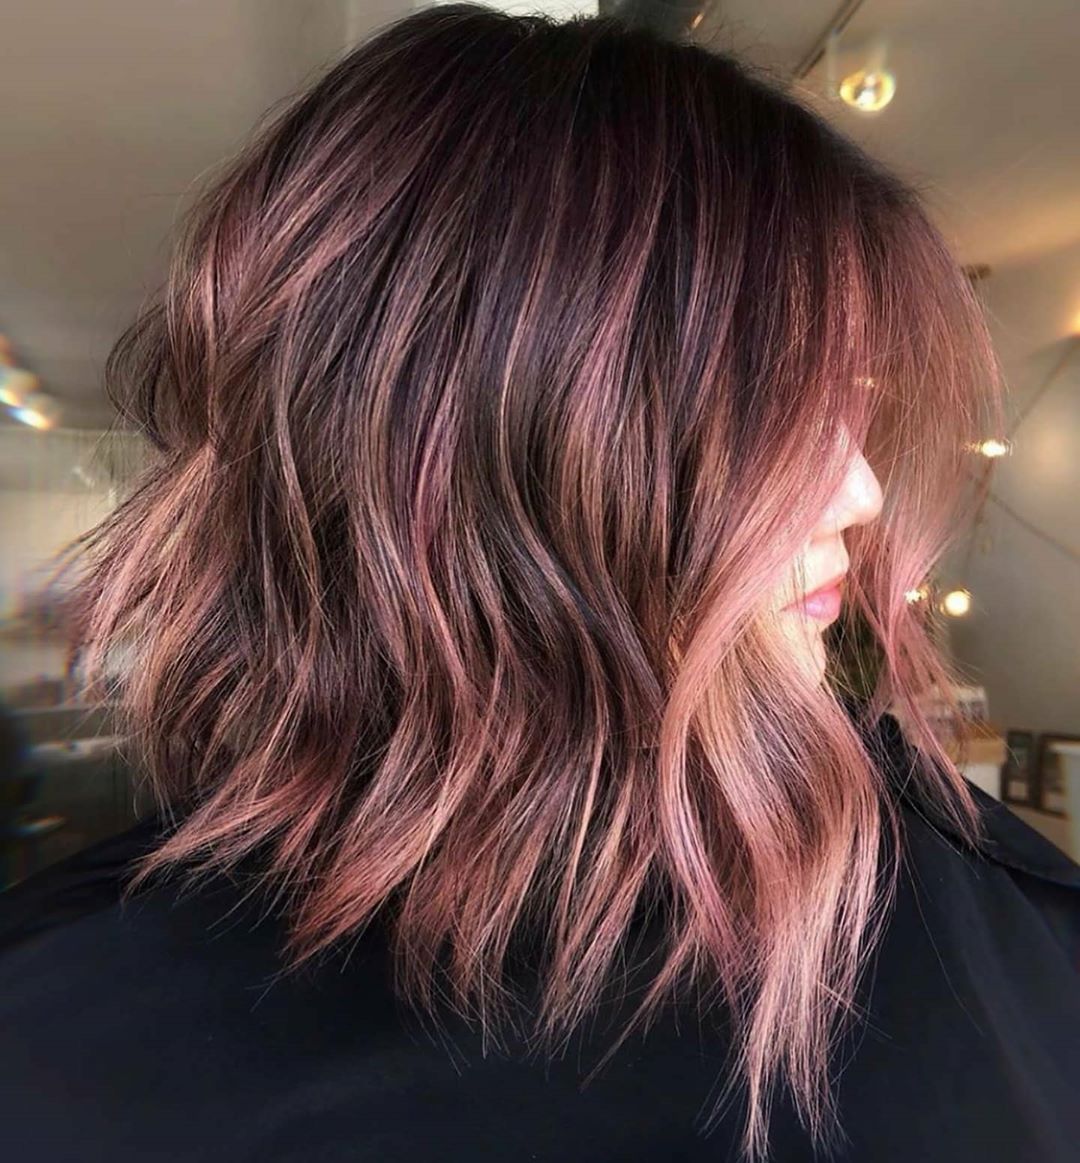 Inspiring Lob Hair Style for Women - Lob Haircut and Hairstyle Ideas of 2021